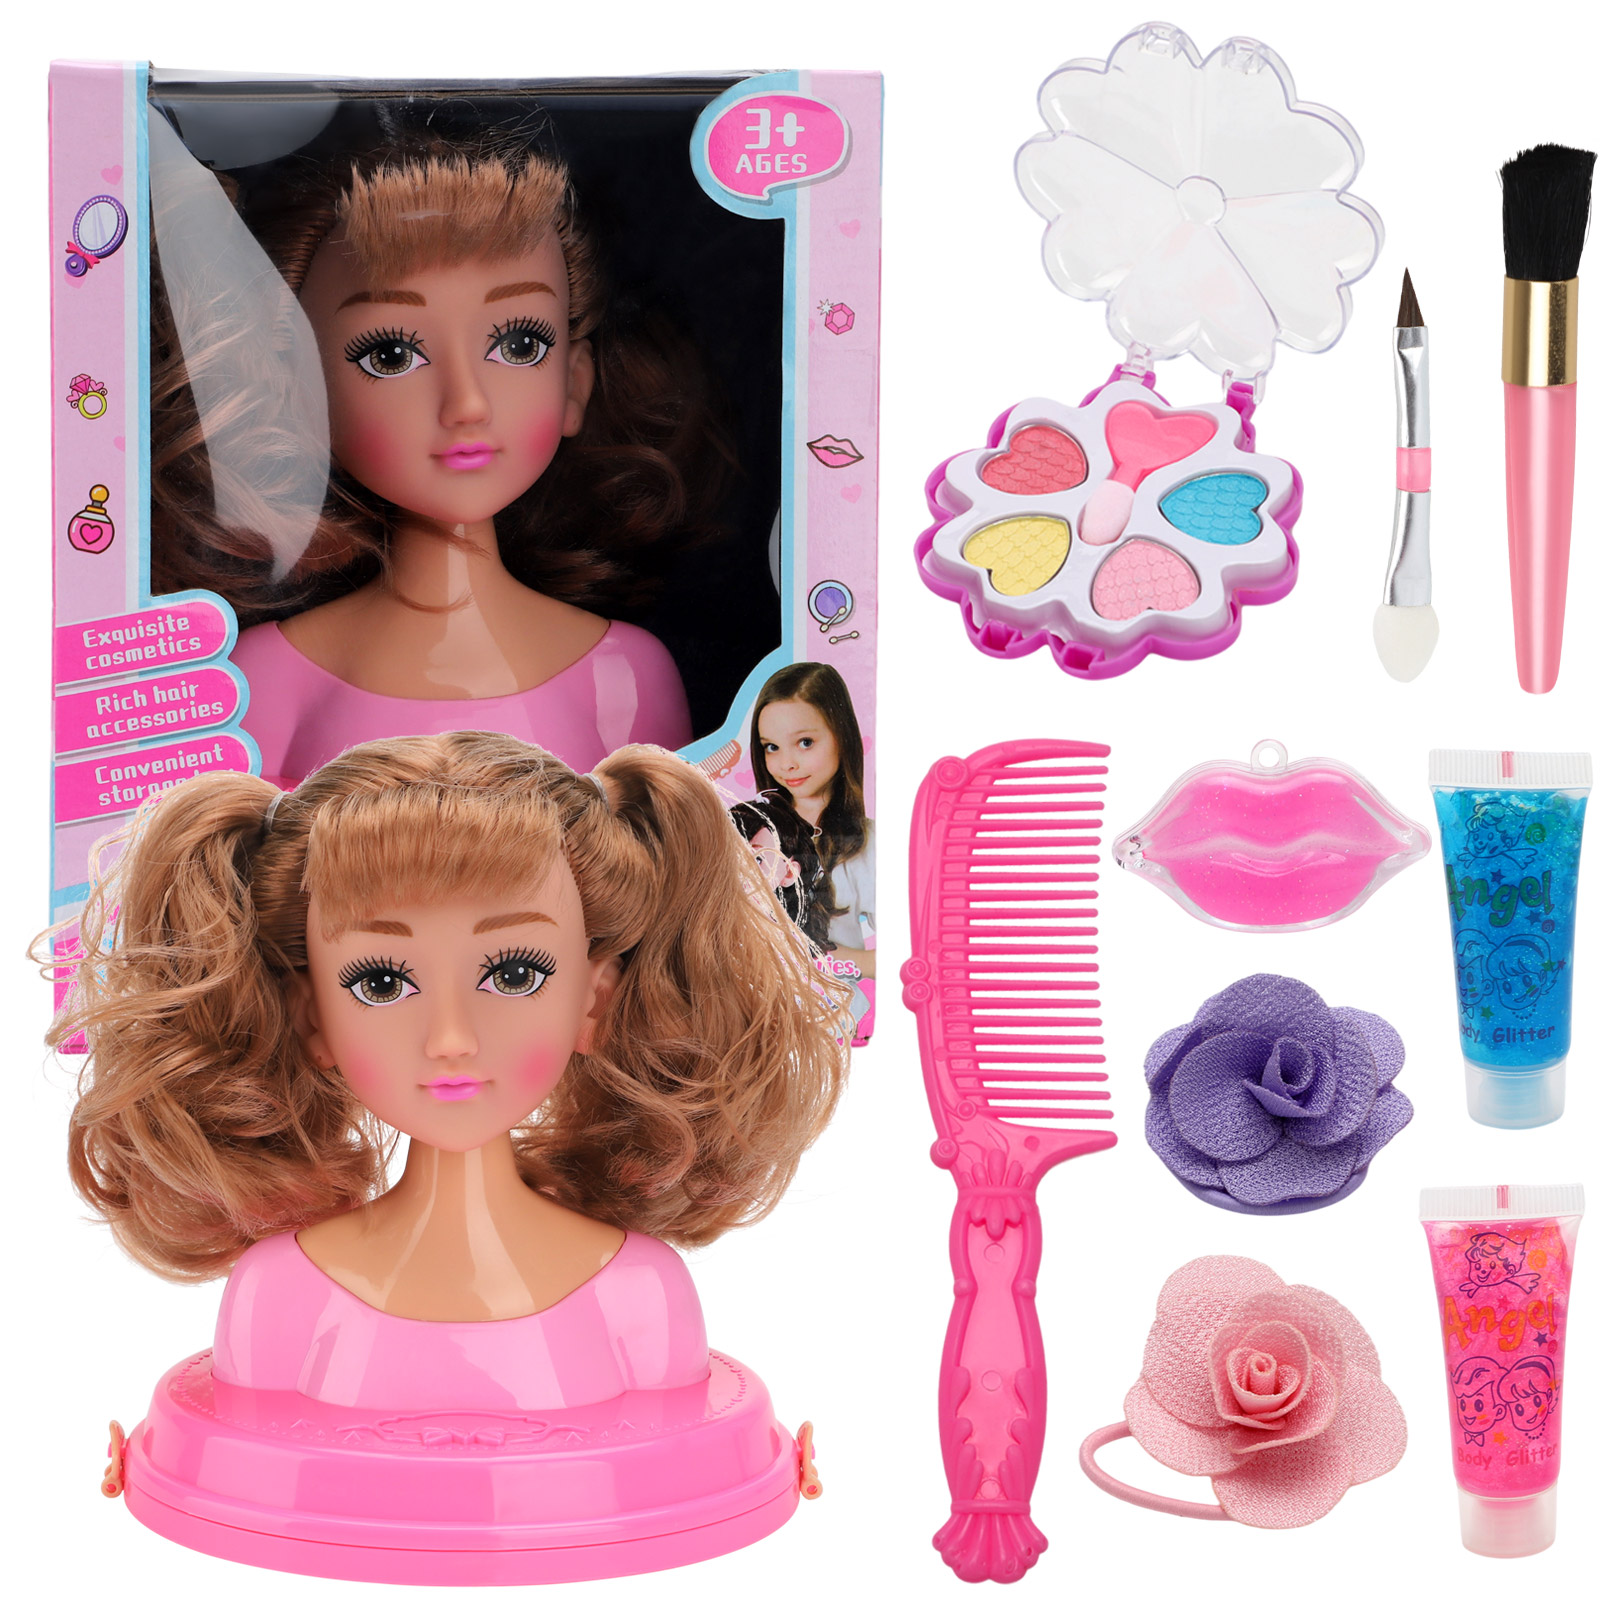 Kids Dolls Styling Head Makeup Comb Hair Toy Doll Set Pretend Play Princess Dressing Play Toys for Girls 3-6 Years, Size: Primary, Pink